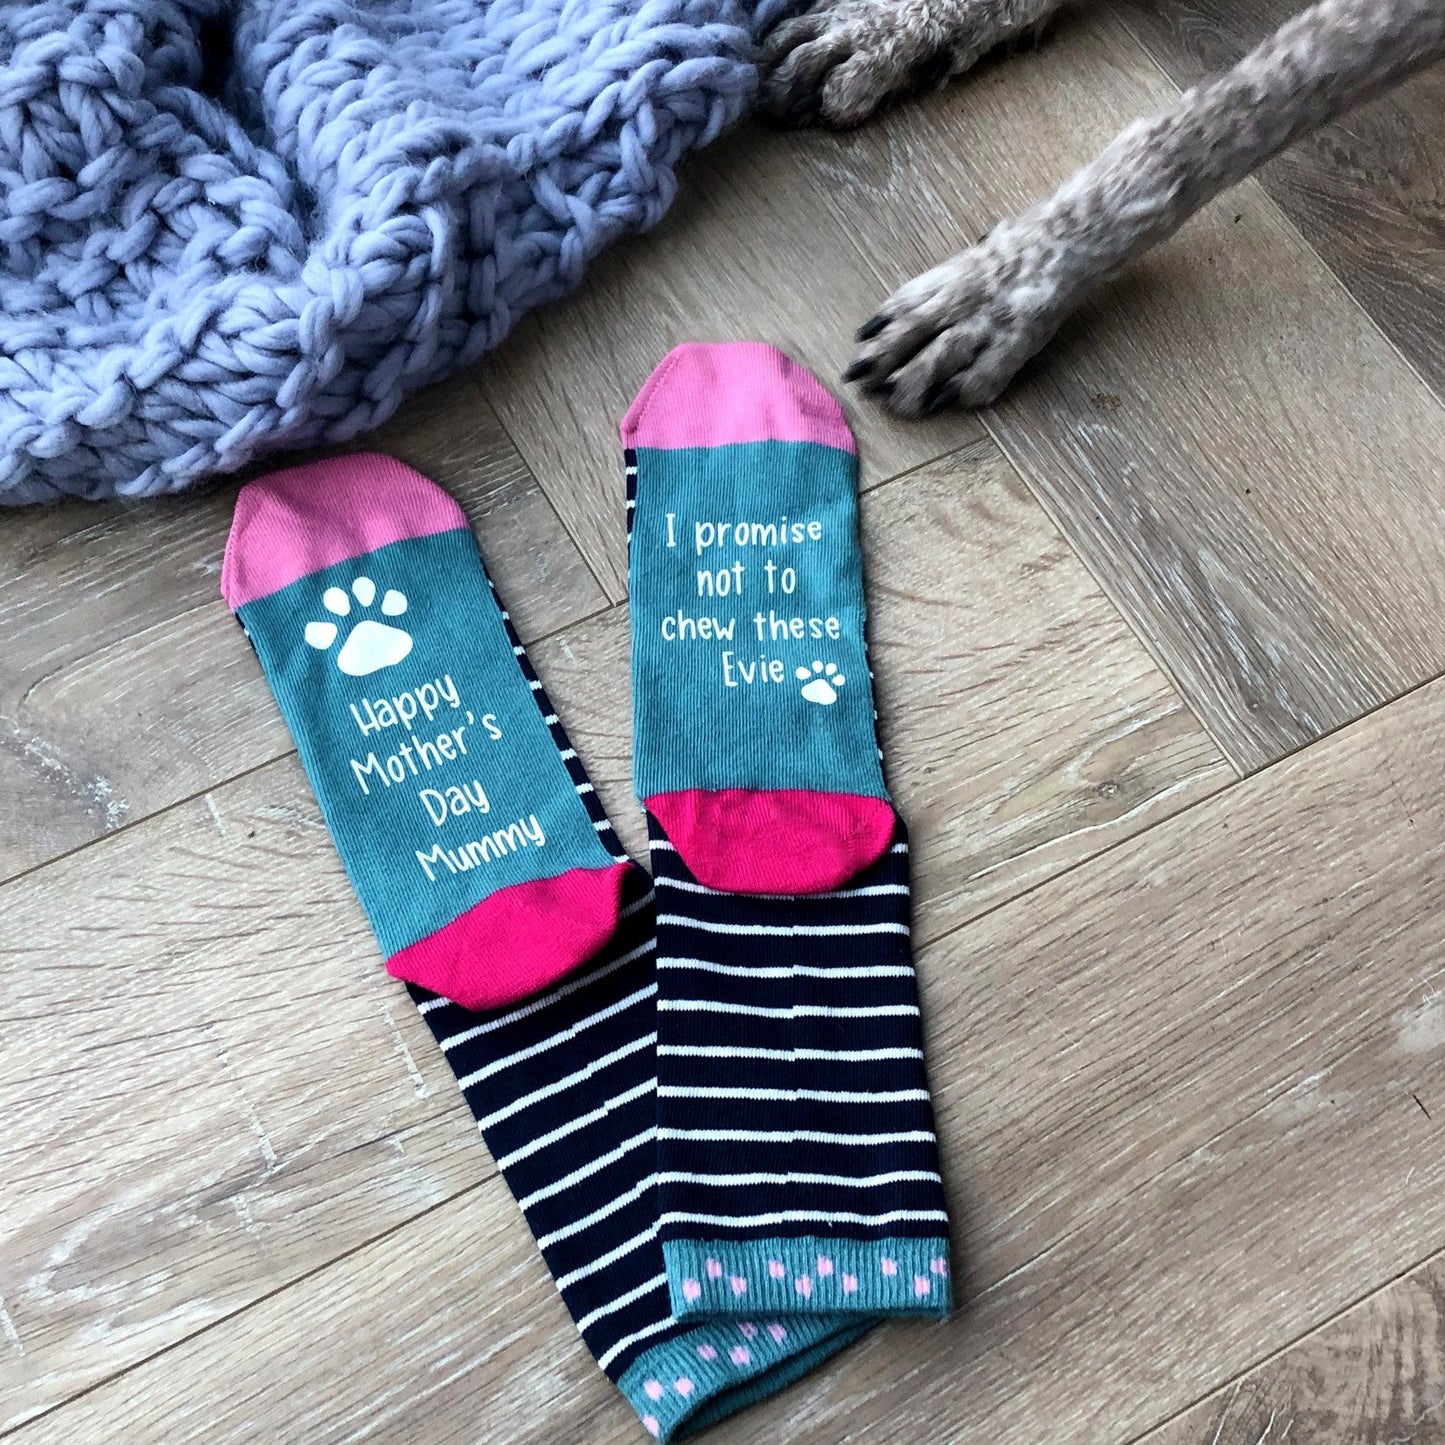 Mother's Day Patterned Socks From The Dog, Socks, - ALPHS 